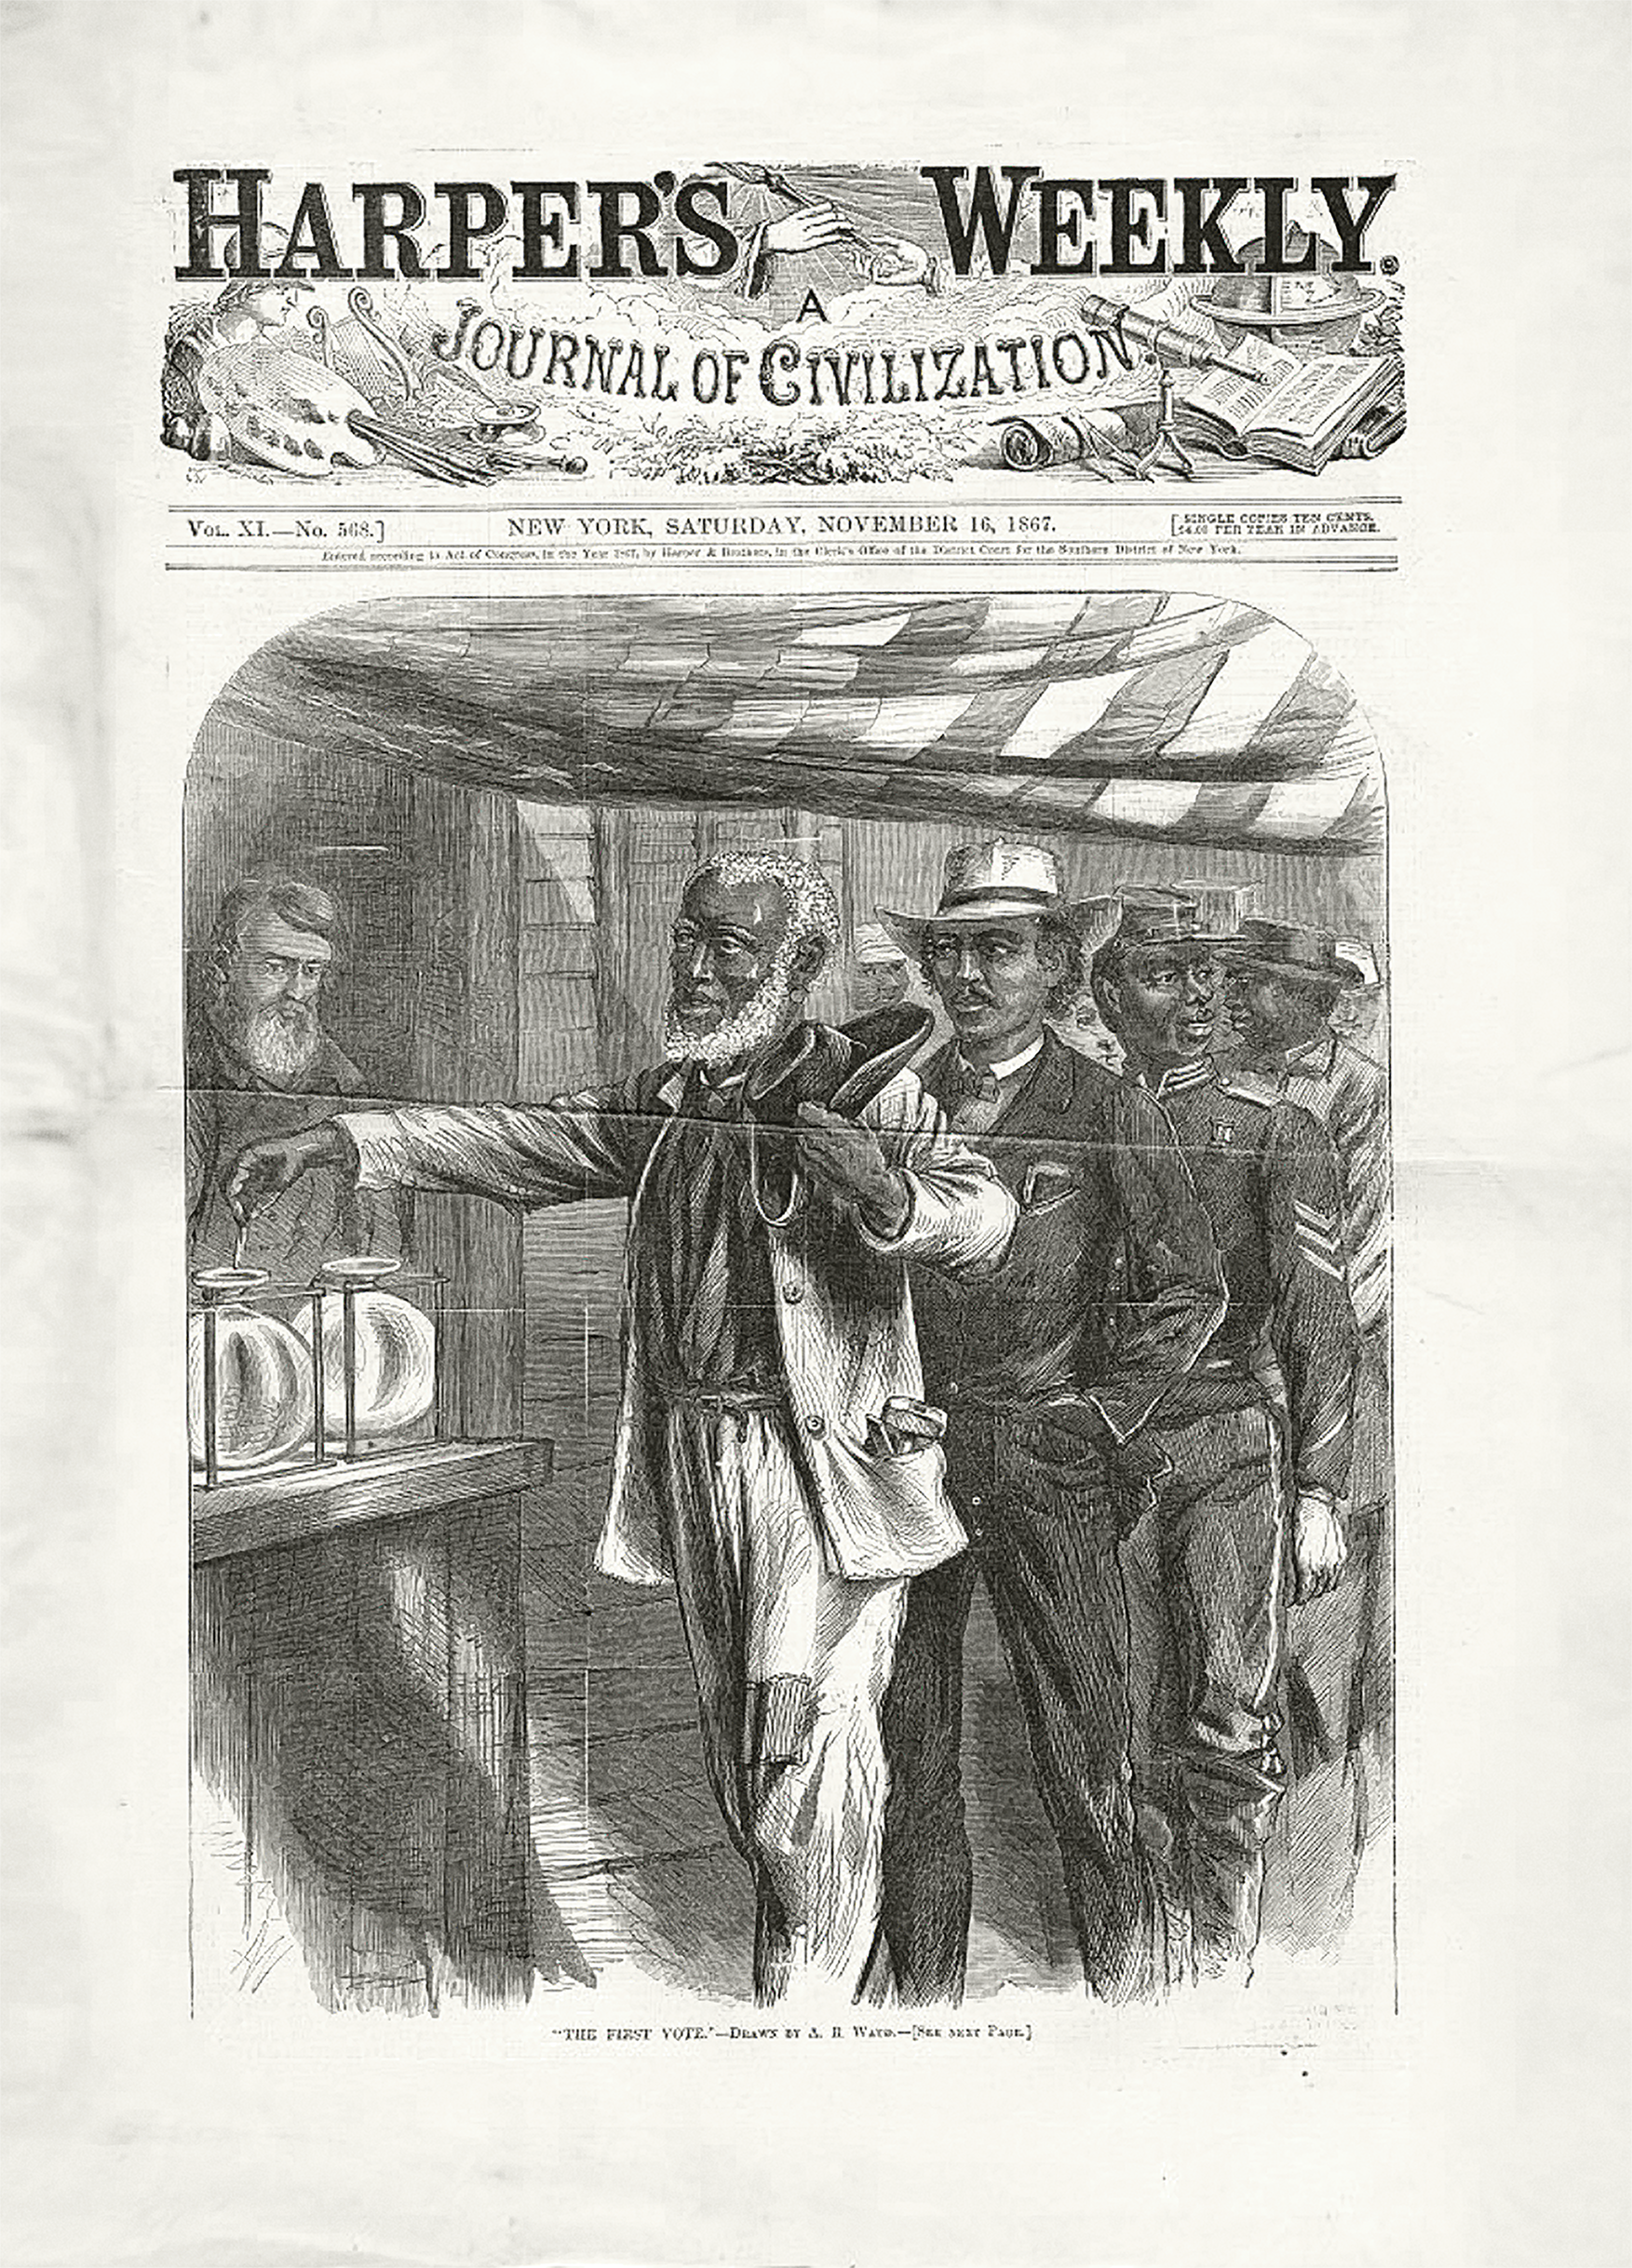 An image entitled, “First Vote,” from the cover of the November 16, 1867 issue of Harper’s Weekly, depicts Black men proudly casting their votes. Library of Congress.